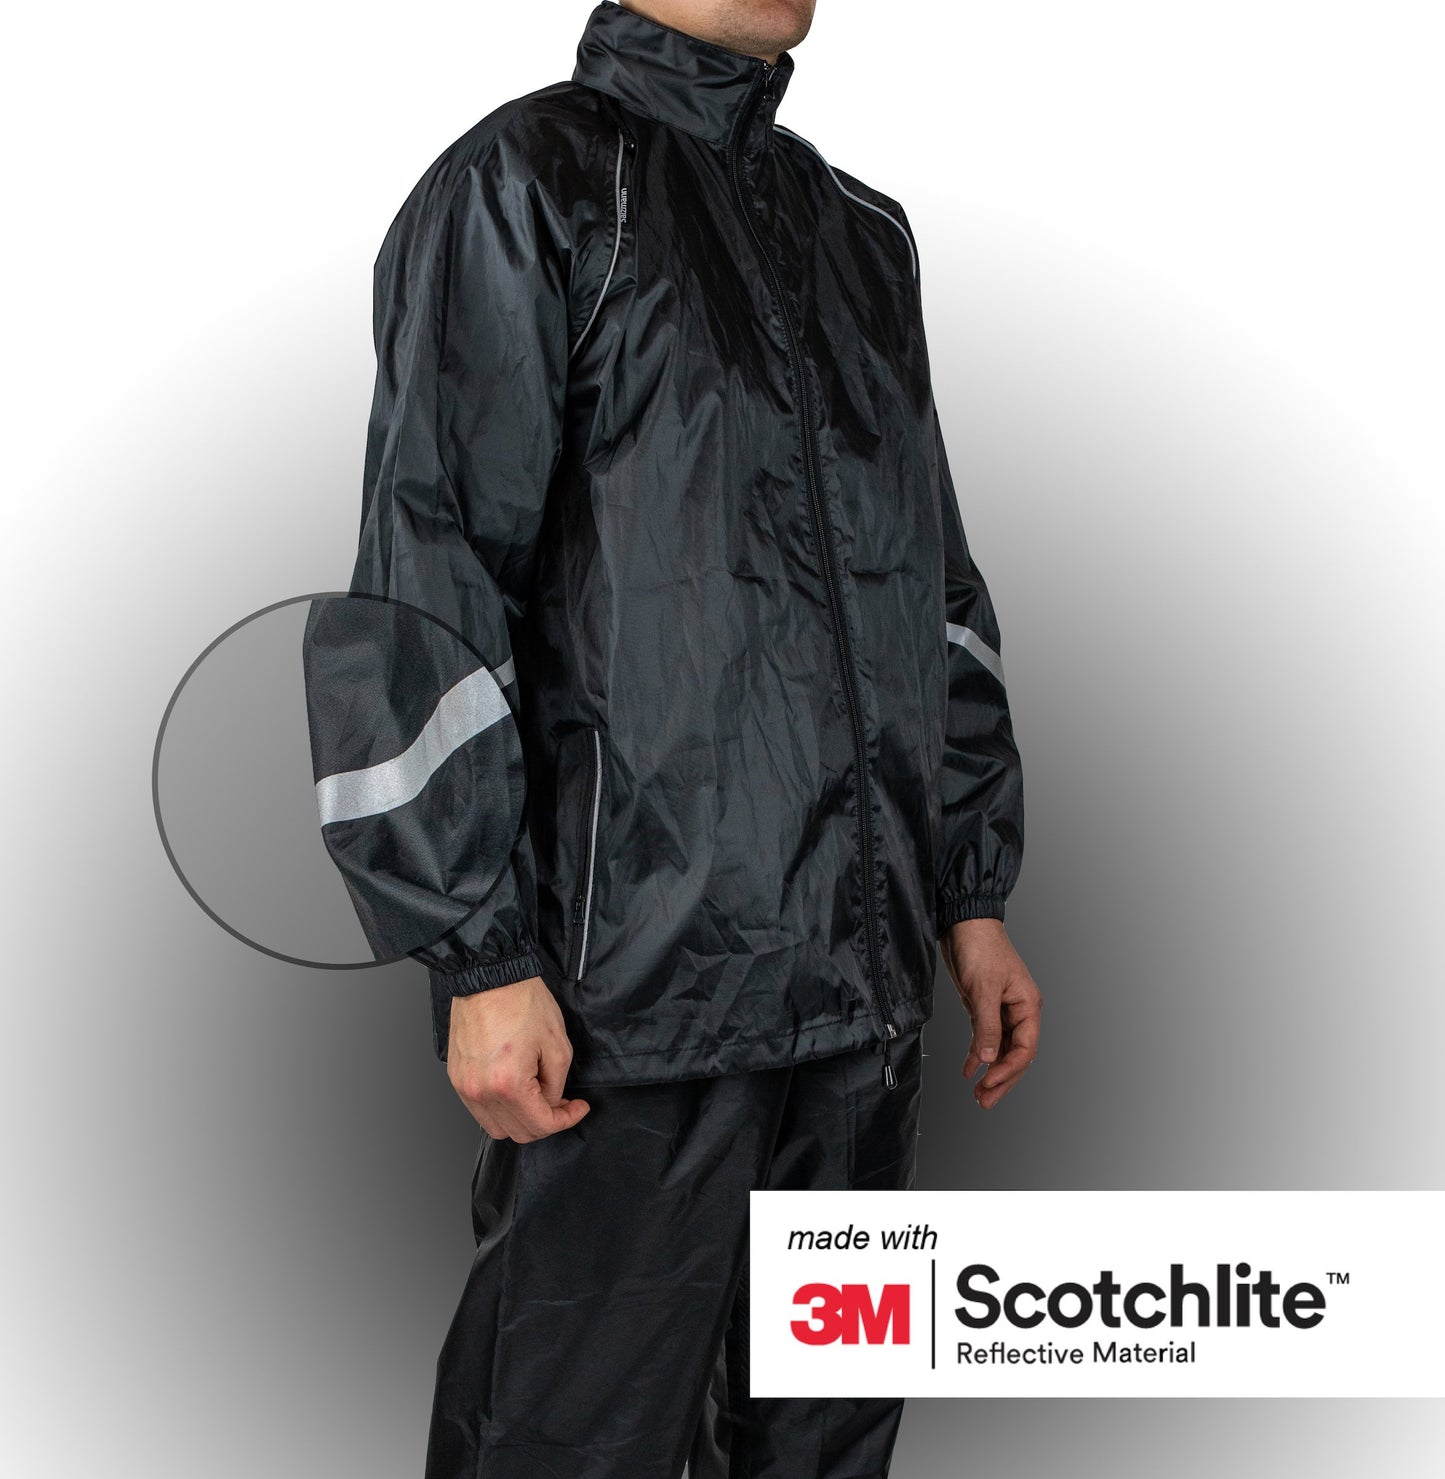 Person wearing rain suit with a close up of reflective strip on the arm.